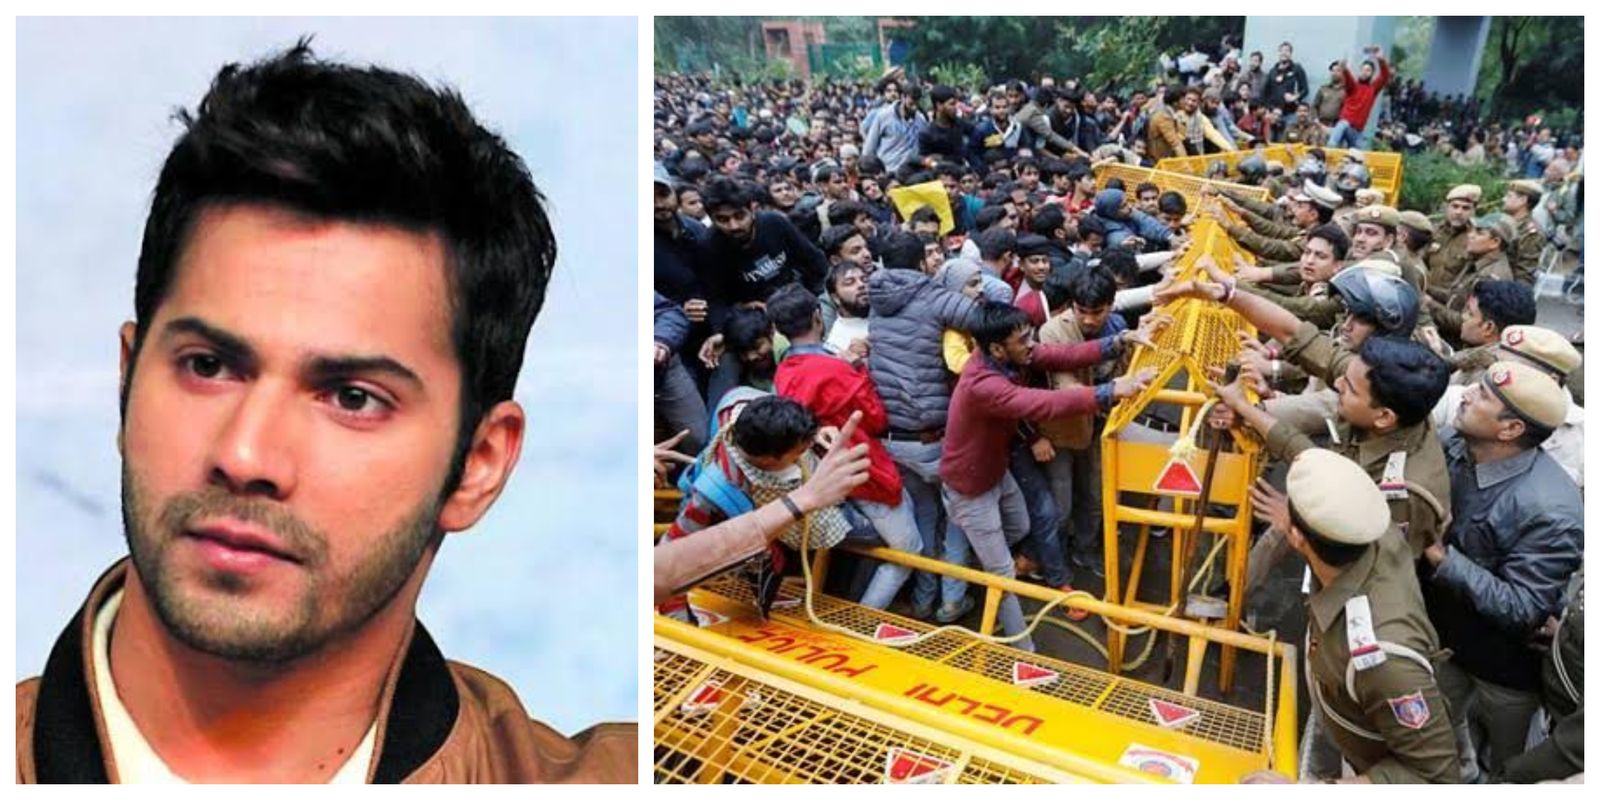 Varun Dhawan Breaks His Silence On The Anti-CAA Protests, Says 'Wrong Of Us To React Until We Are Fully Aware'